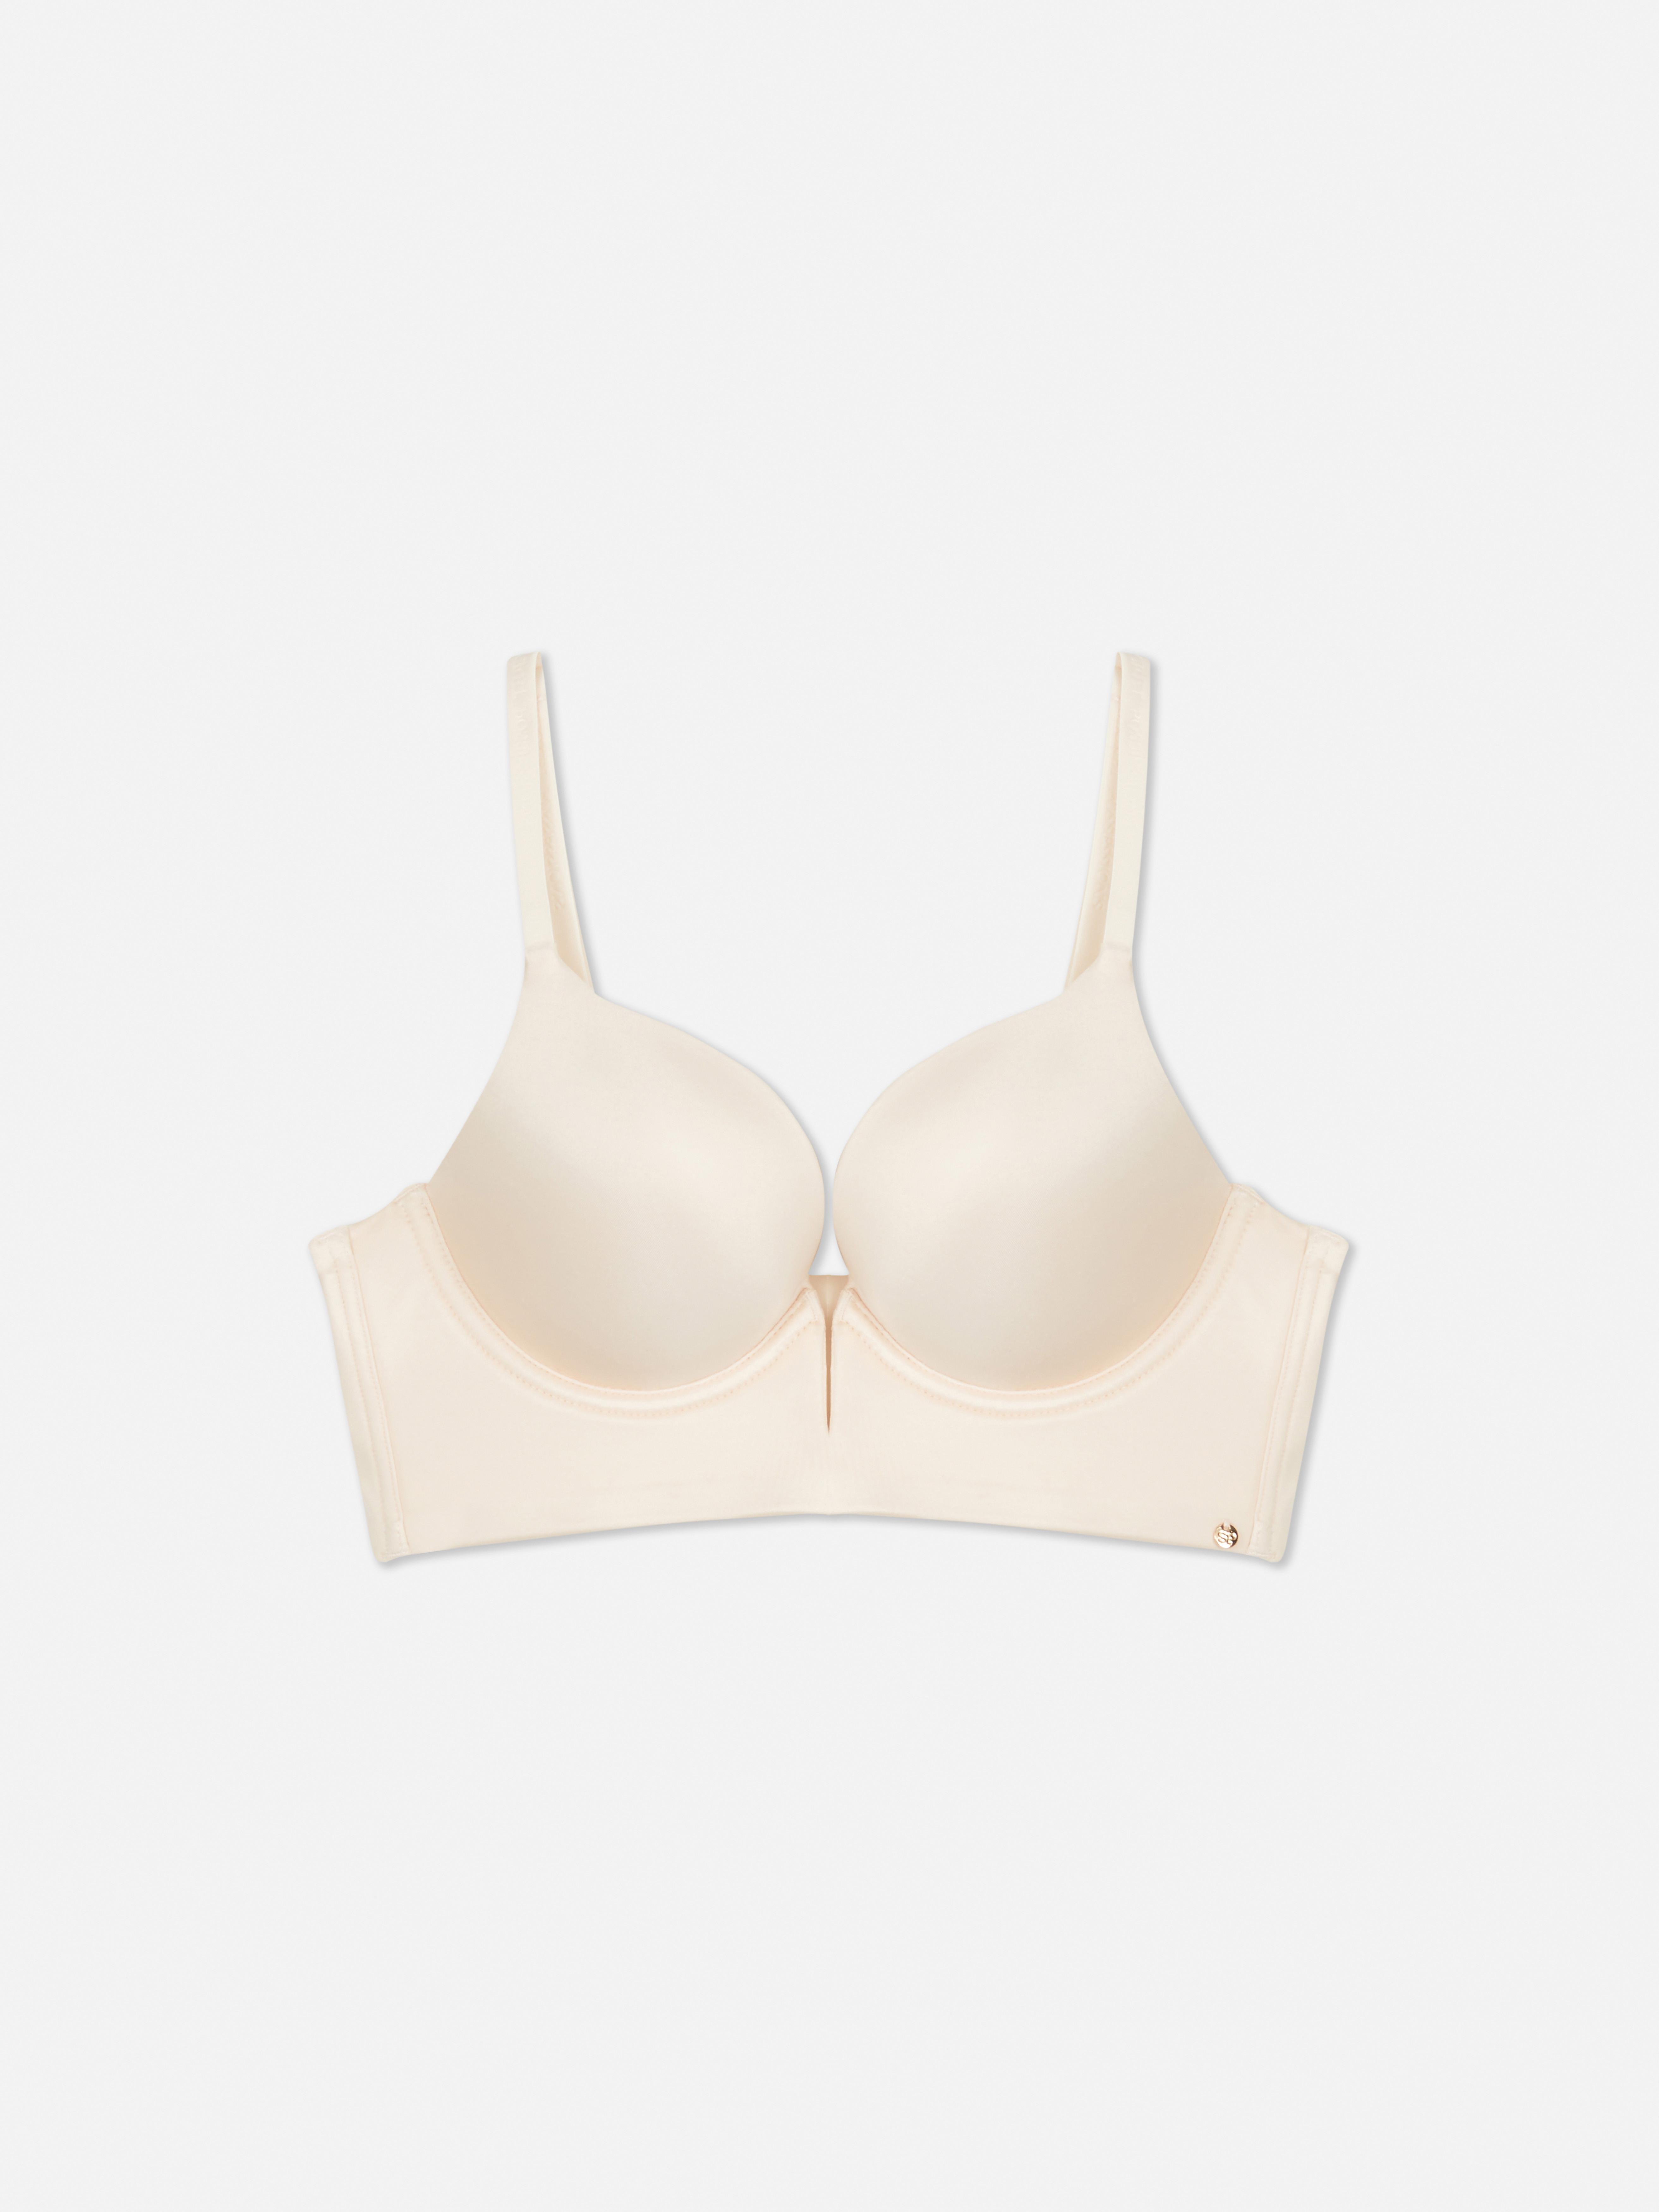 Primark ultra push up nude bra Worn only to try on, - Depop